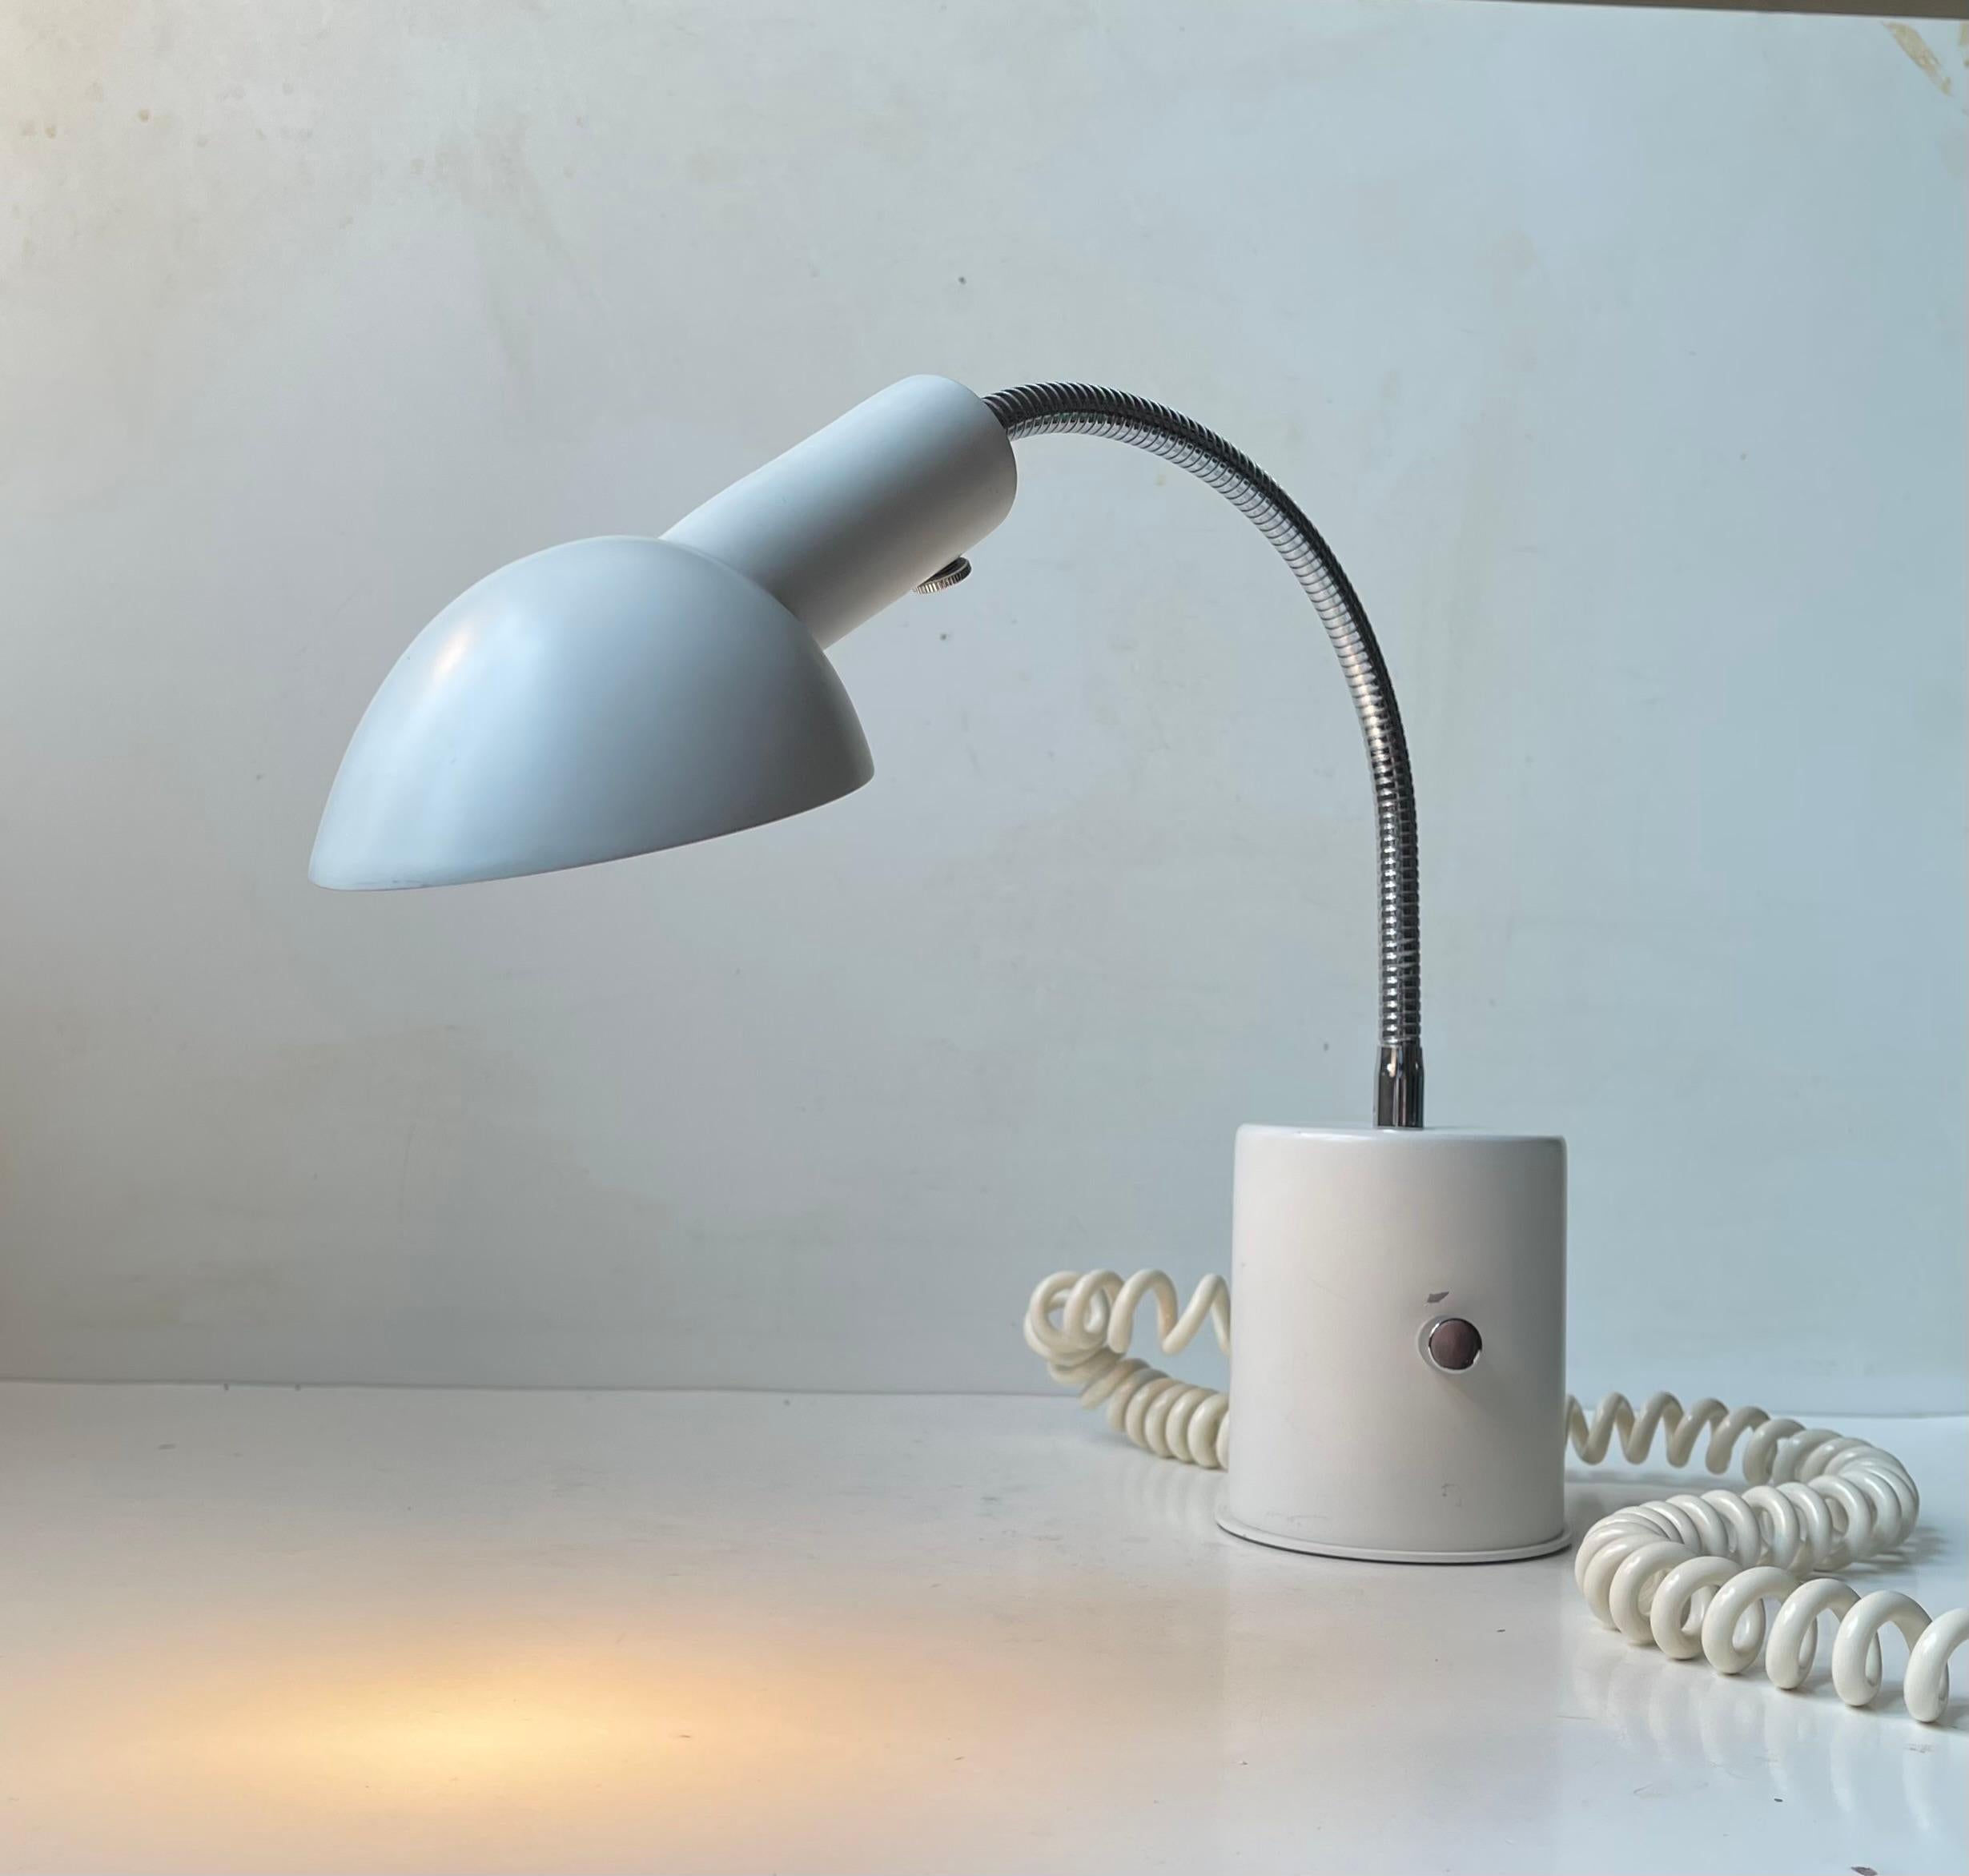 Powder-Coated Asger B. C. White Danish Minimalist Architects Desk or Table Lamp, 1980s For Sale